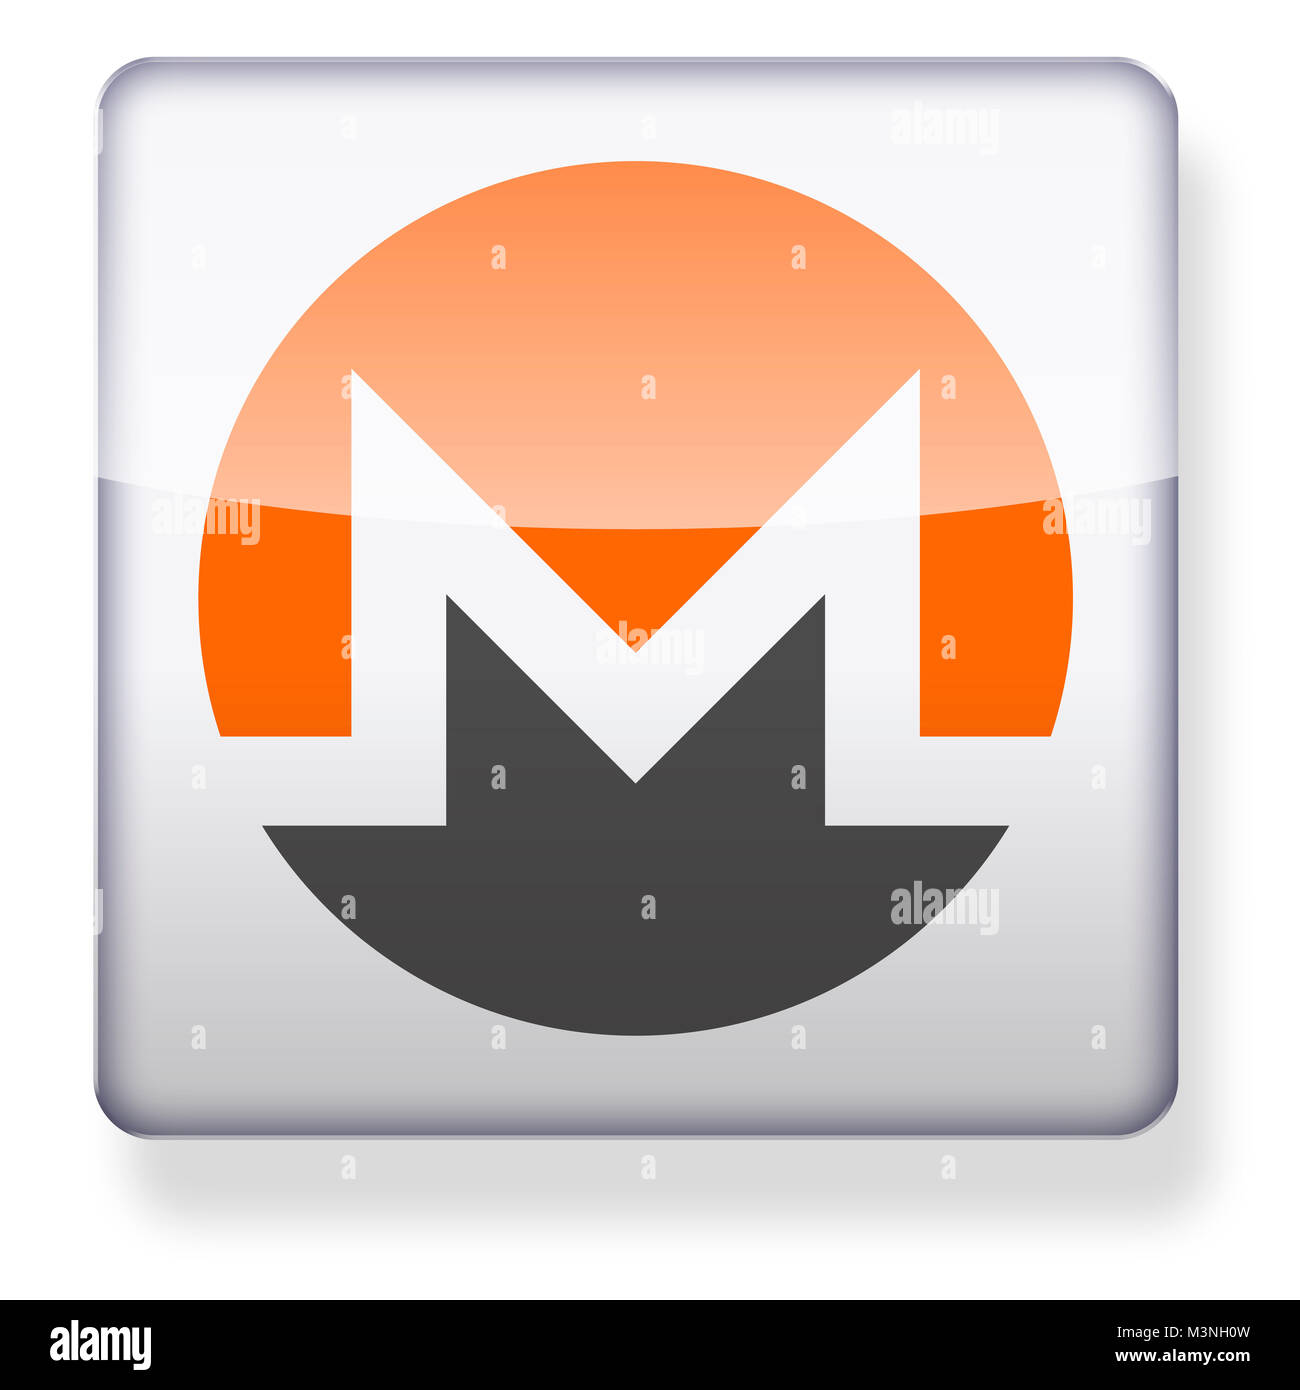 Monero cryptocurrency XMR logo as an app icon. Clipping path included. Stock Photo